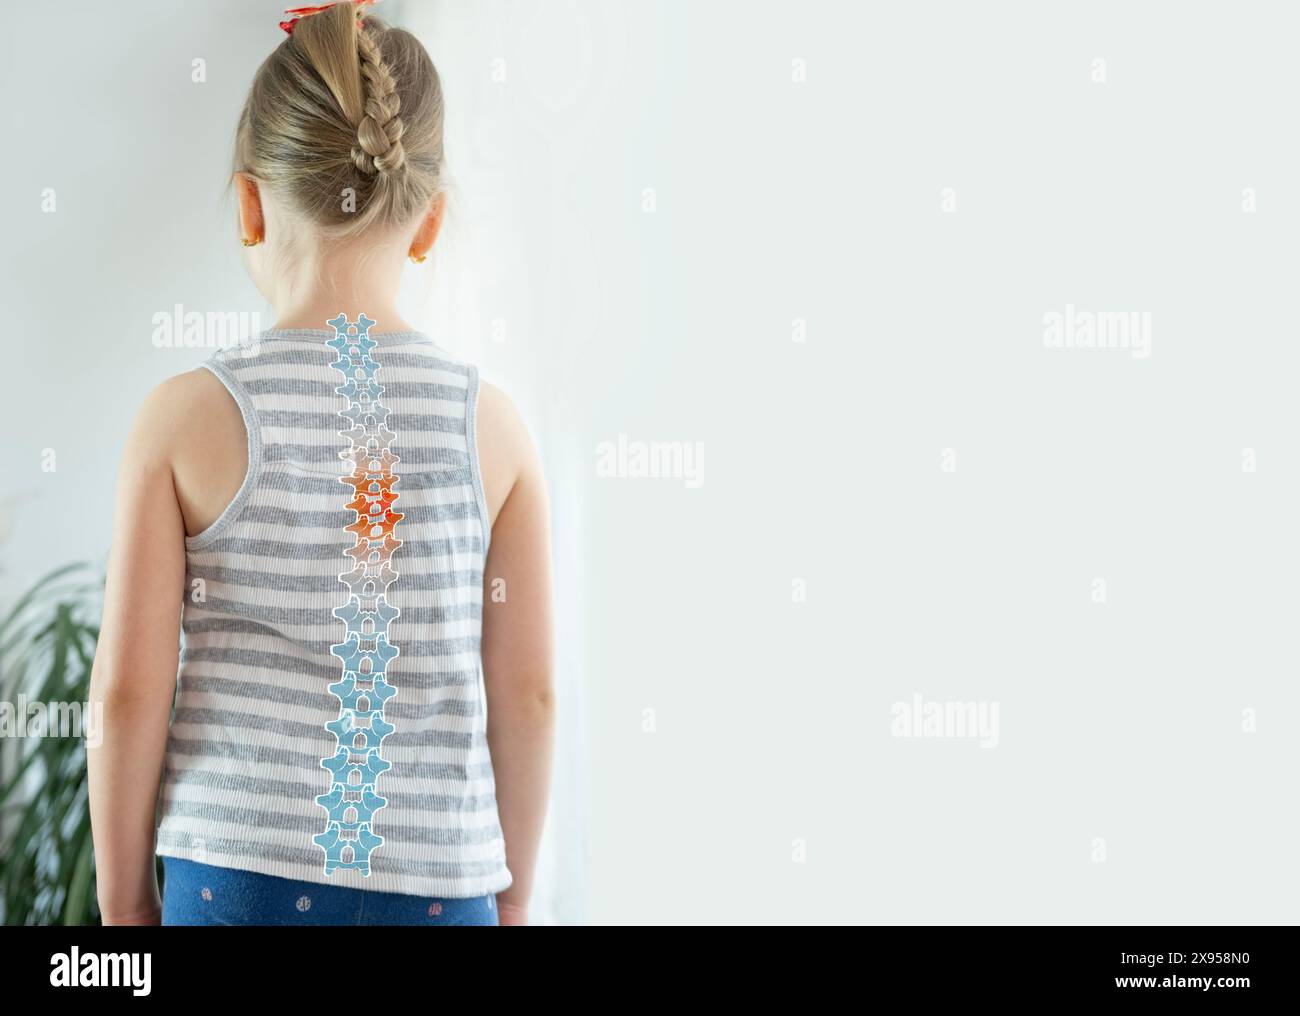 back little girl with scoliosis, child 5 years old crookedly standing, spine deformity curved, orthopedic condition, need for medical attention Stock Photo